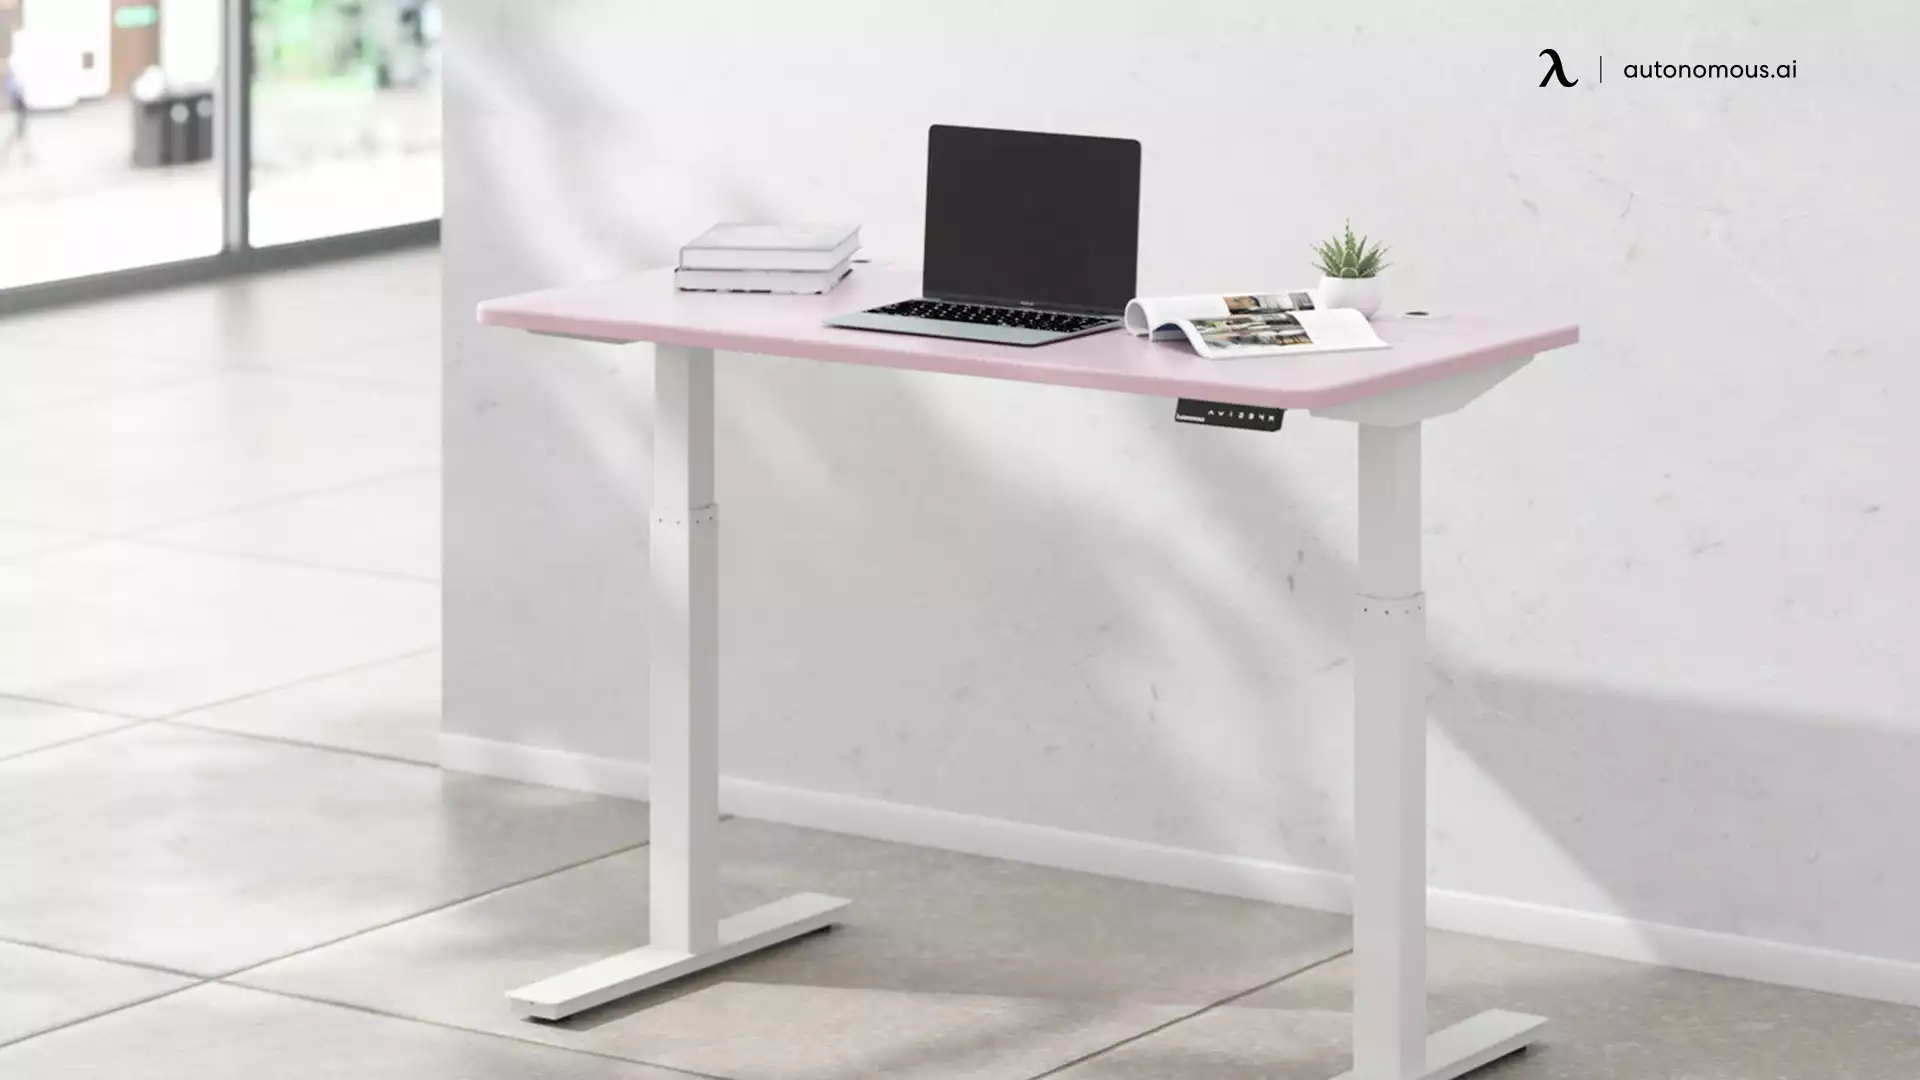 Selecting the correct office desk